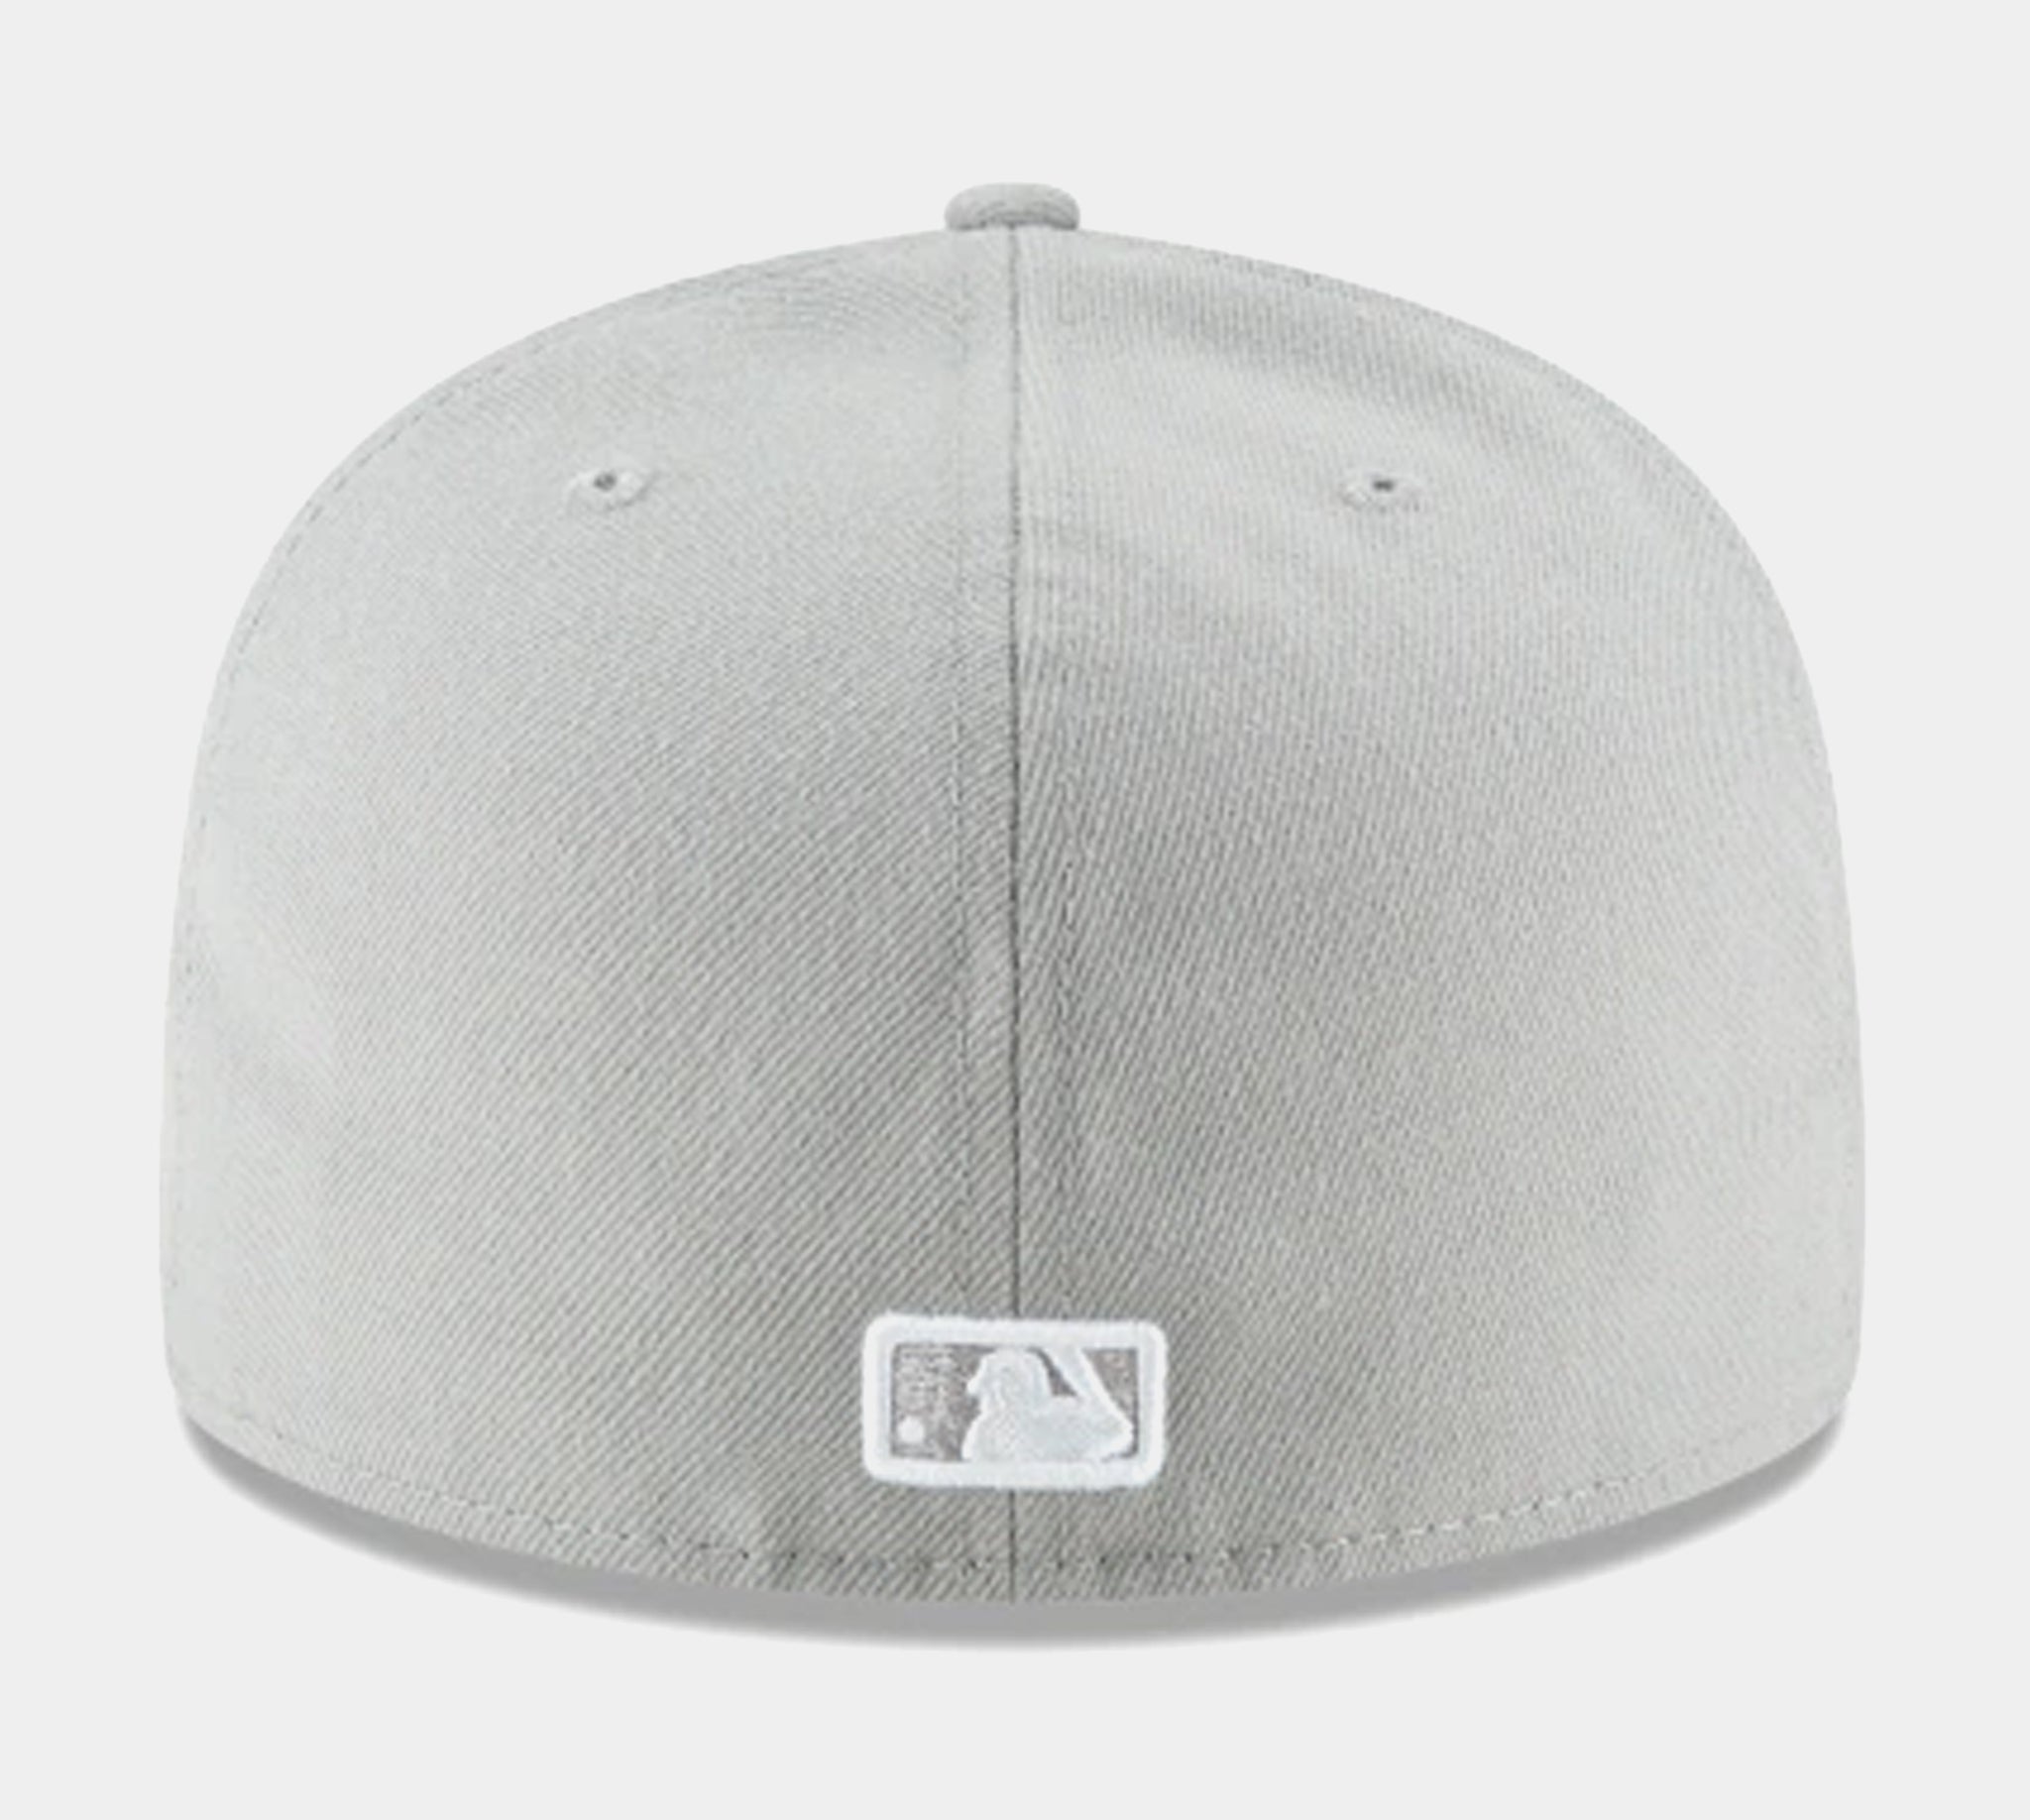 Los Angeles Dodgers 59FIFTY Fitted Cap Mens Hat (Grey)